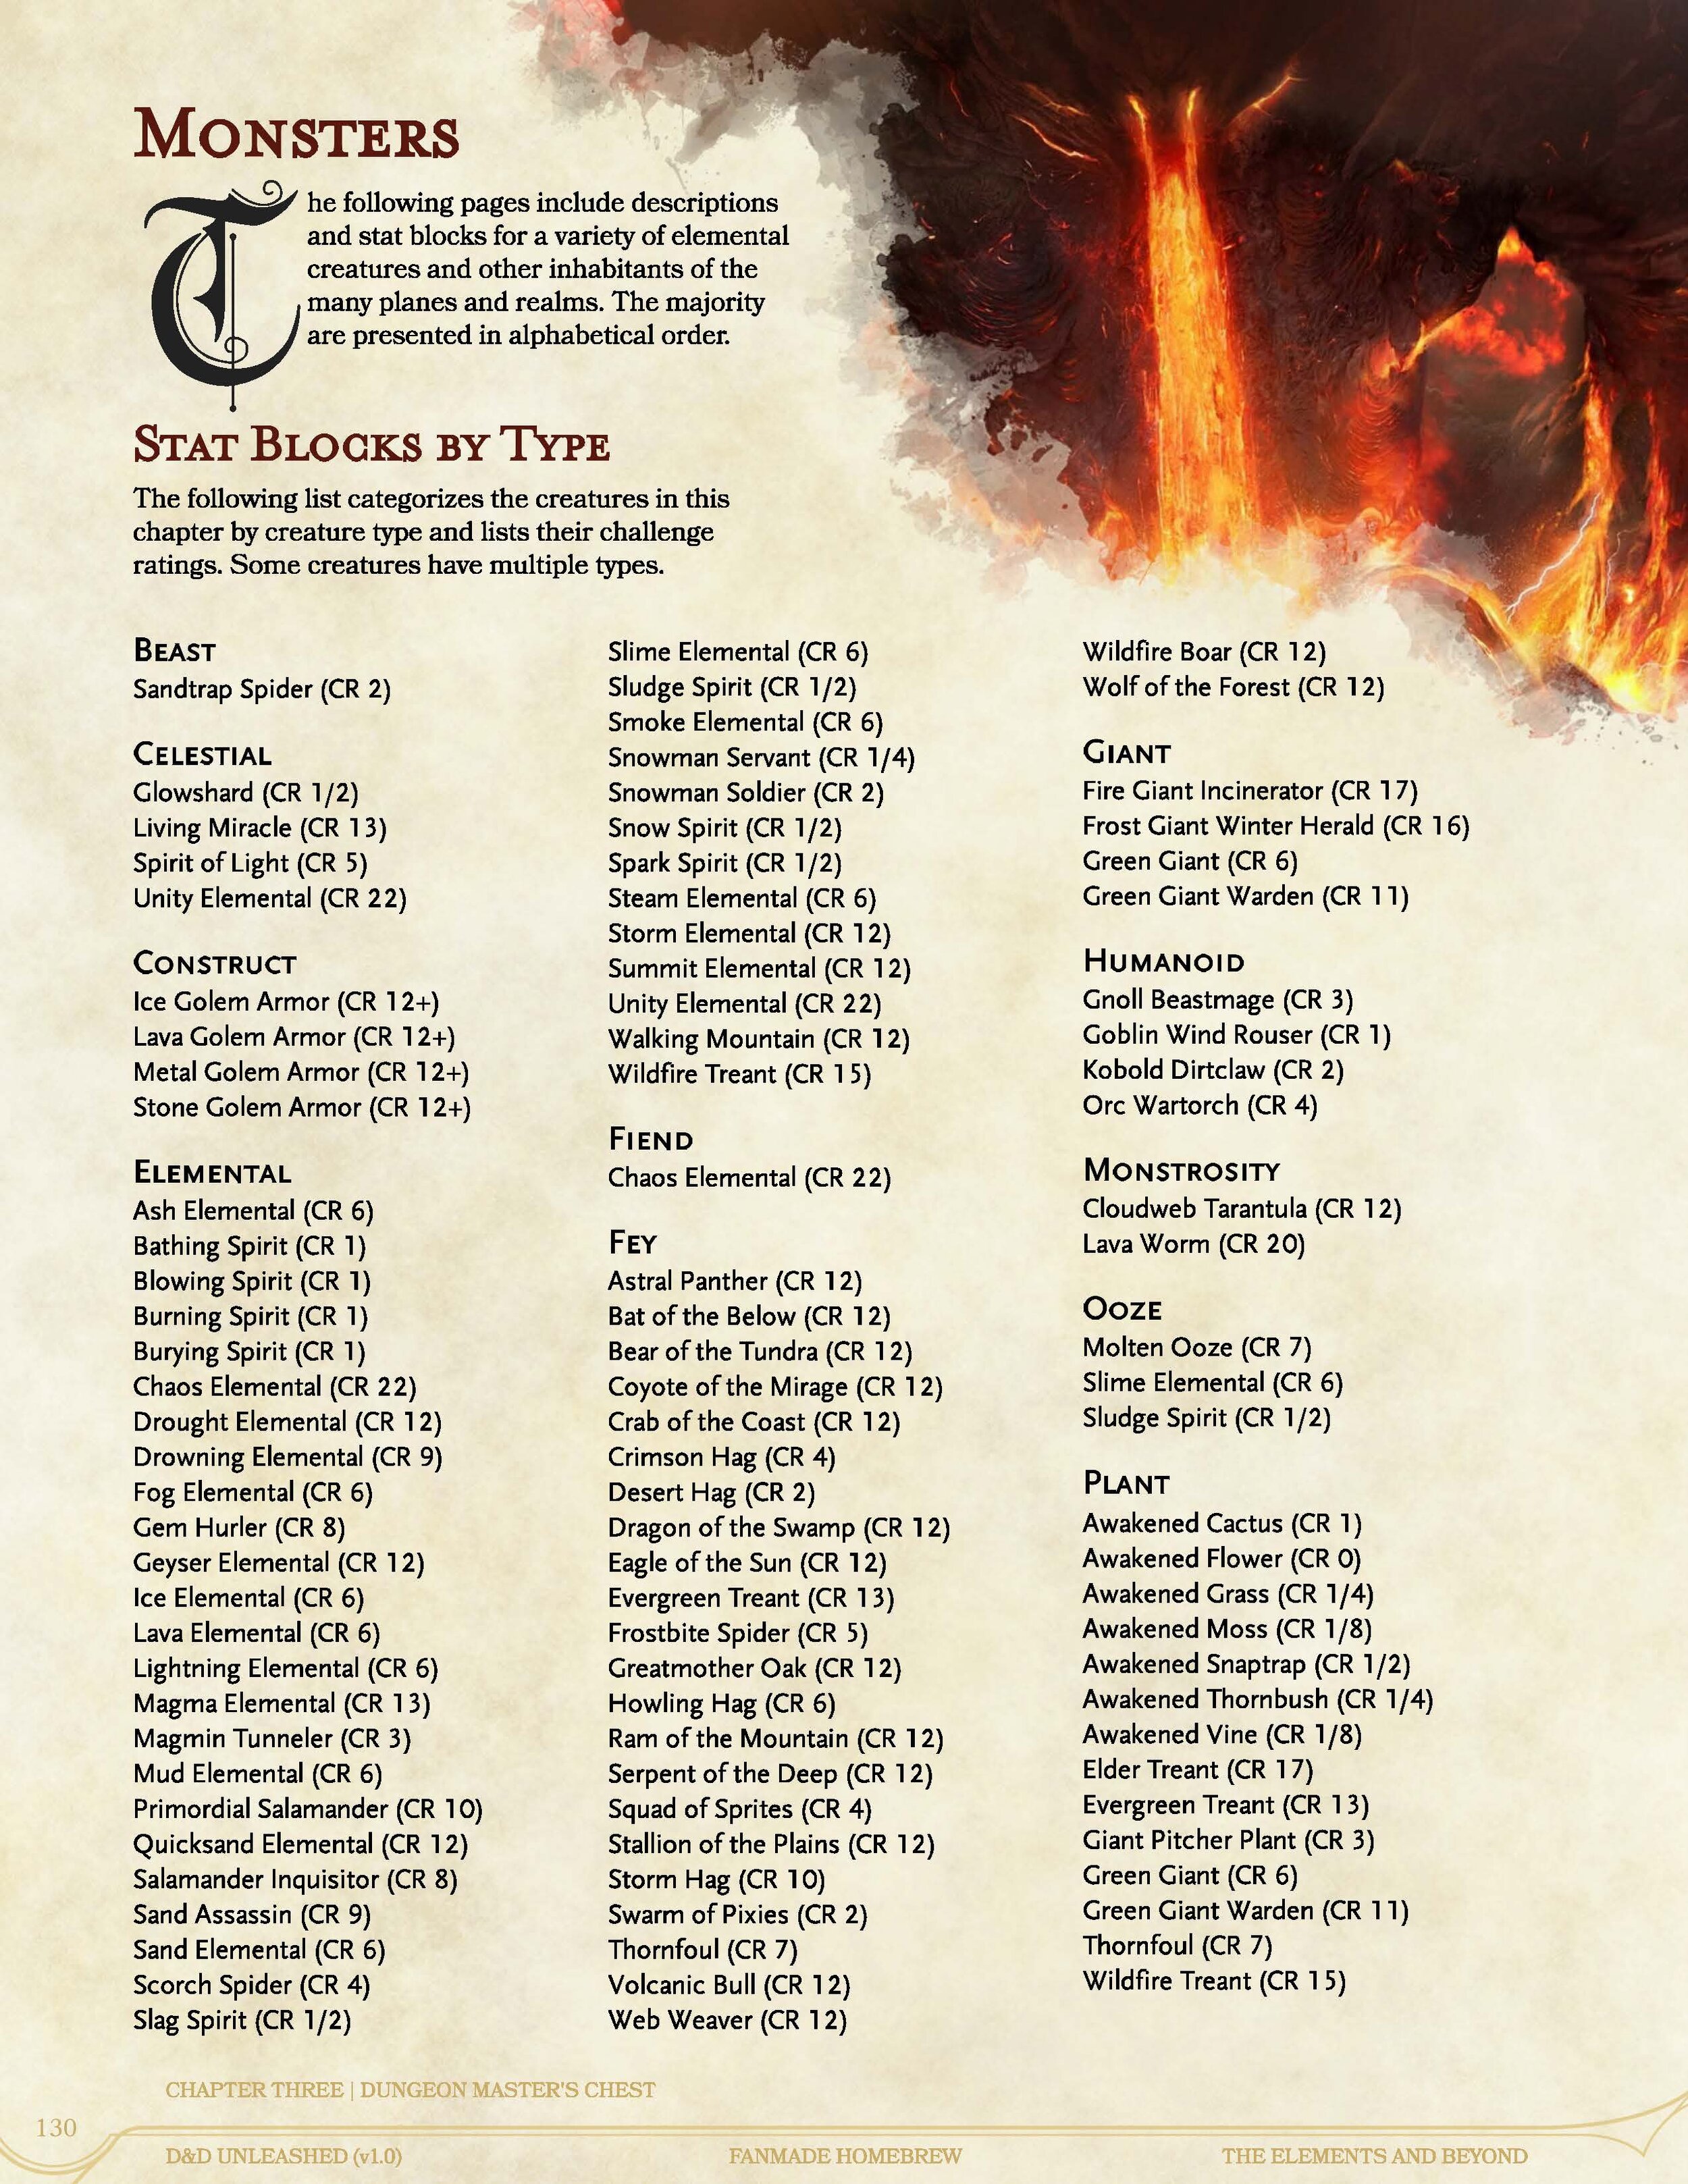 D&D Unleashed Compendium -- The Elements and Beyond (v1p0)_Page_130.jpg